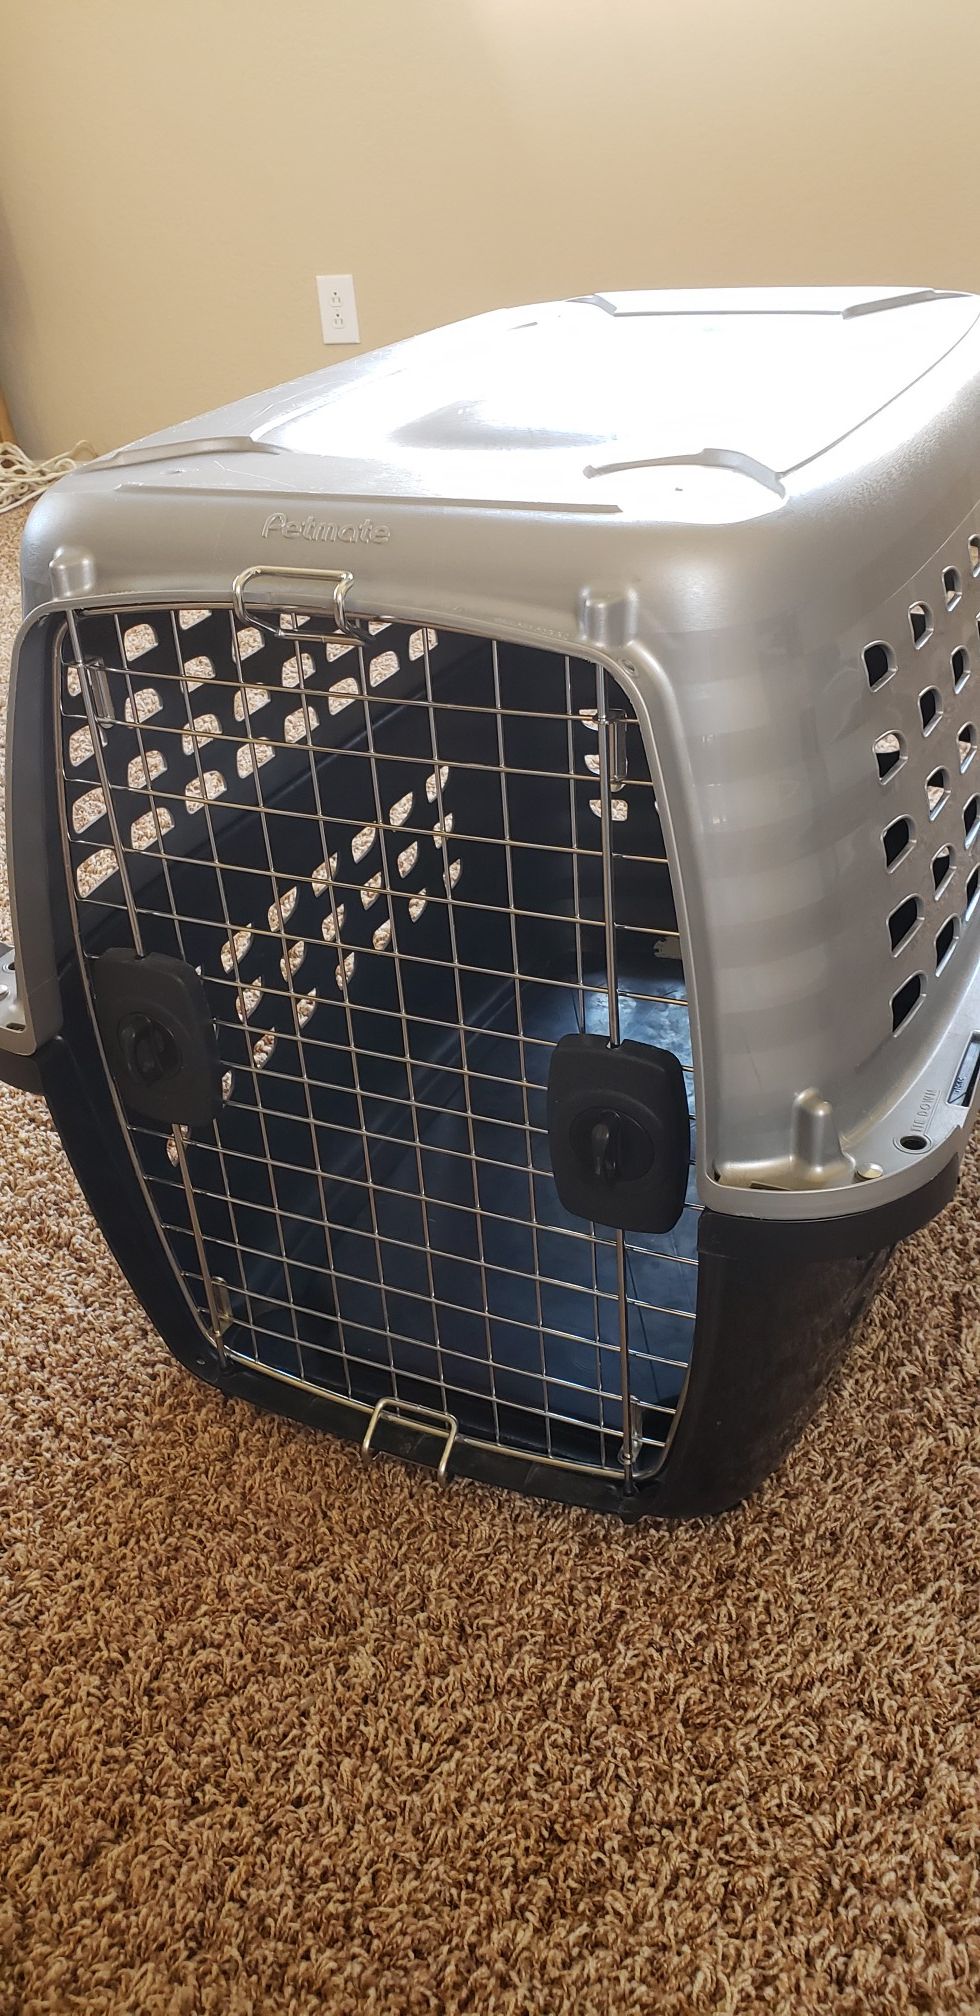 Petmate Dog crate. Good condition, door can open both directions.